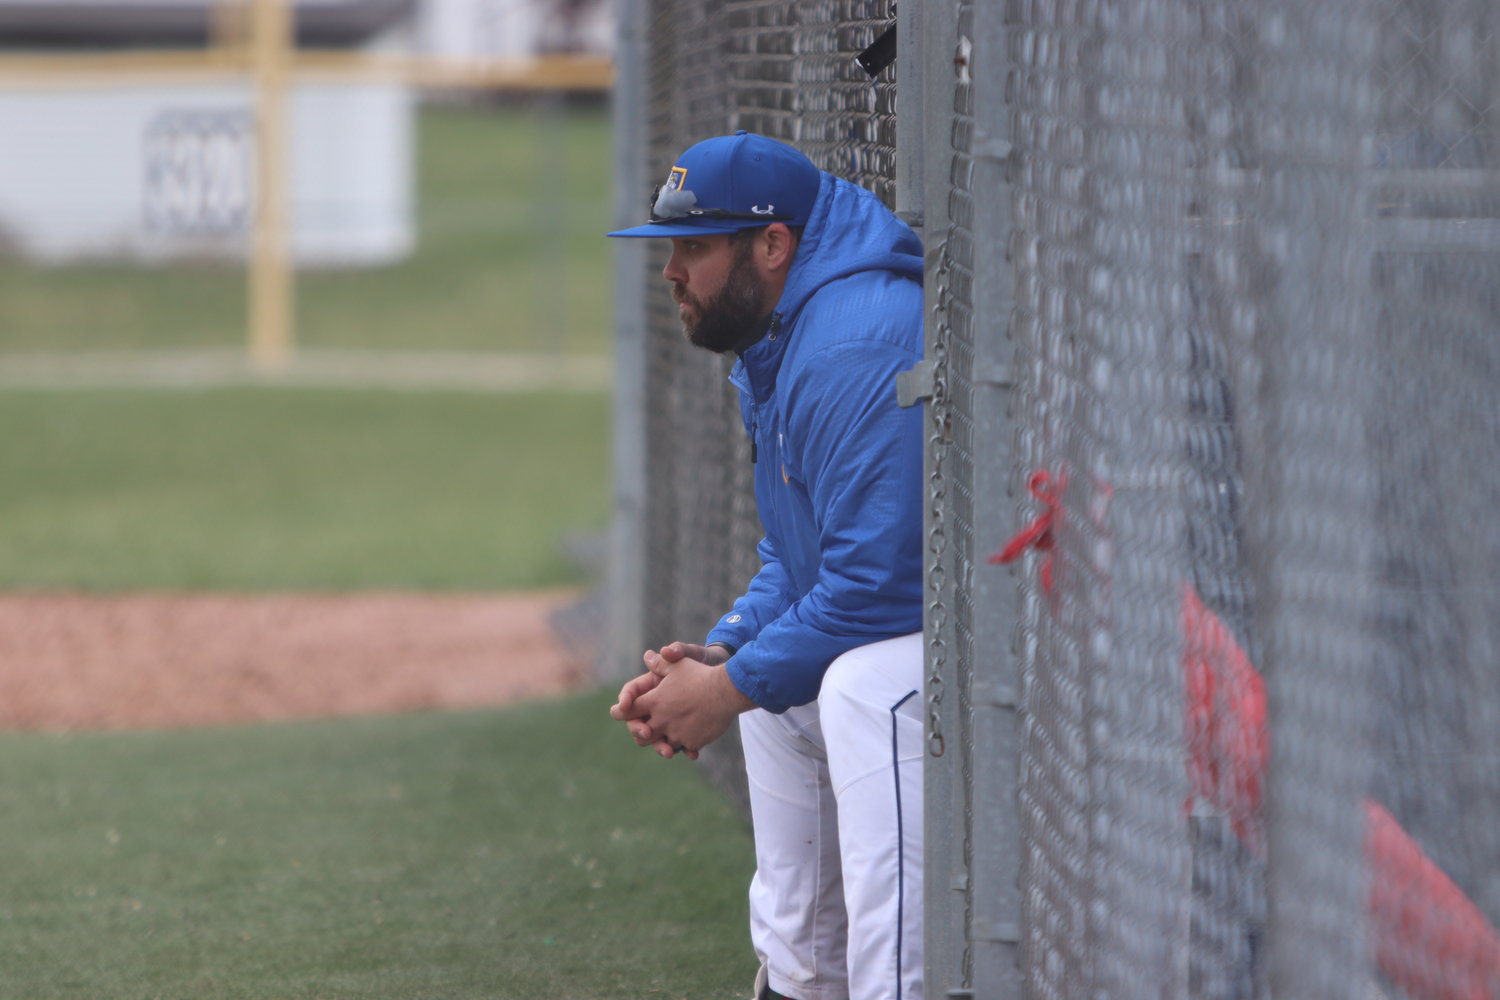 Wright City baseball coach Ryan Raterman watches from the dugout during a game earlier this season.